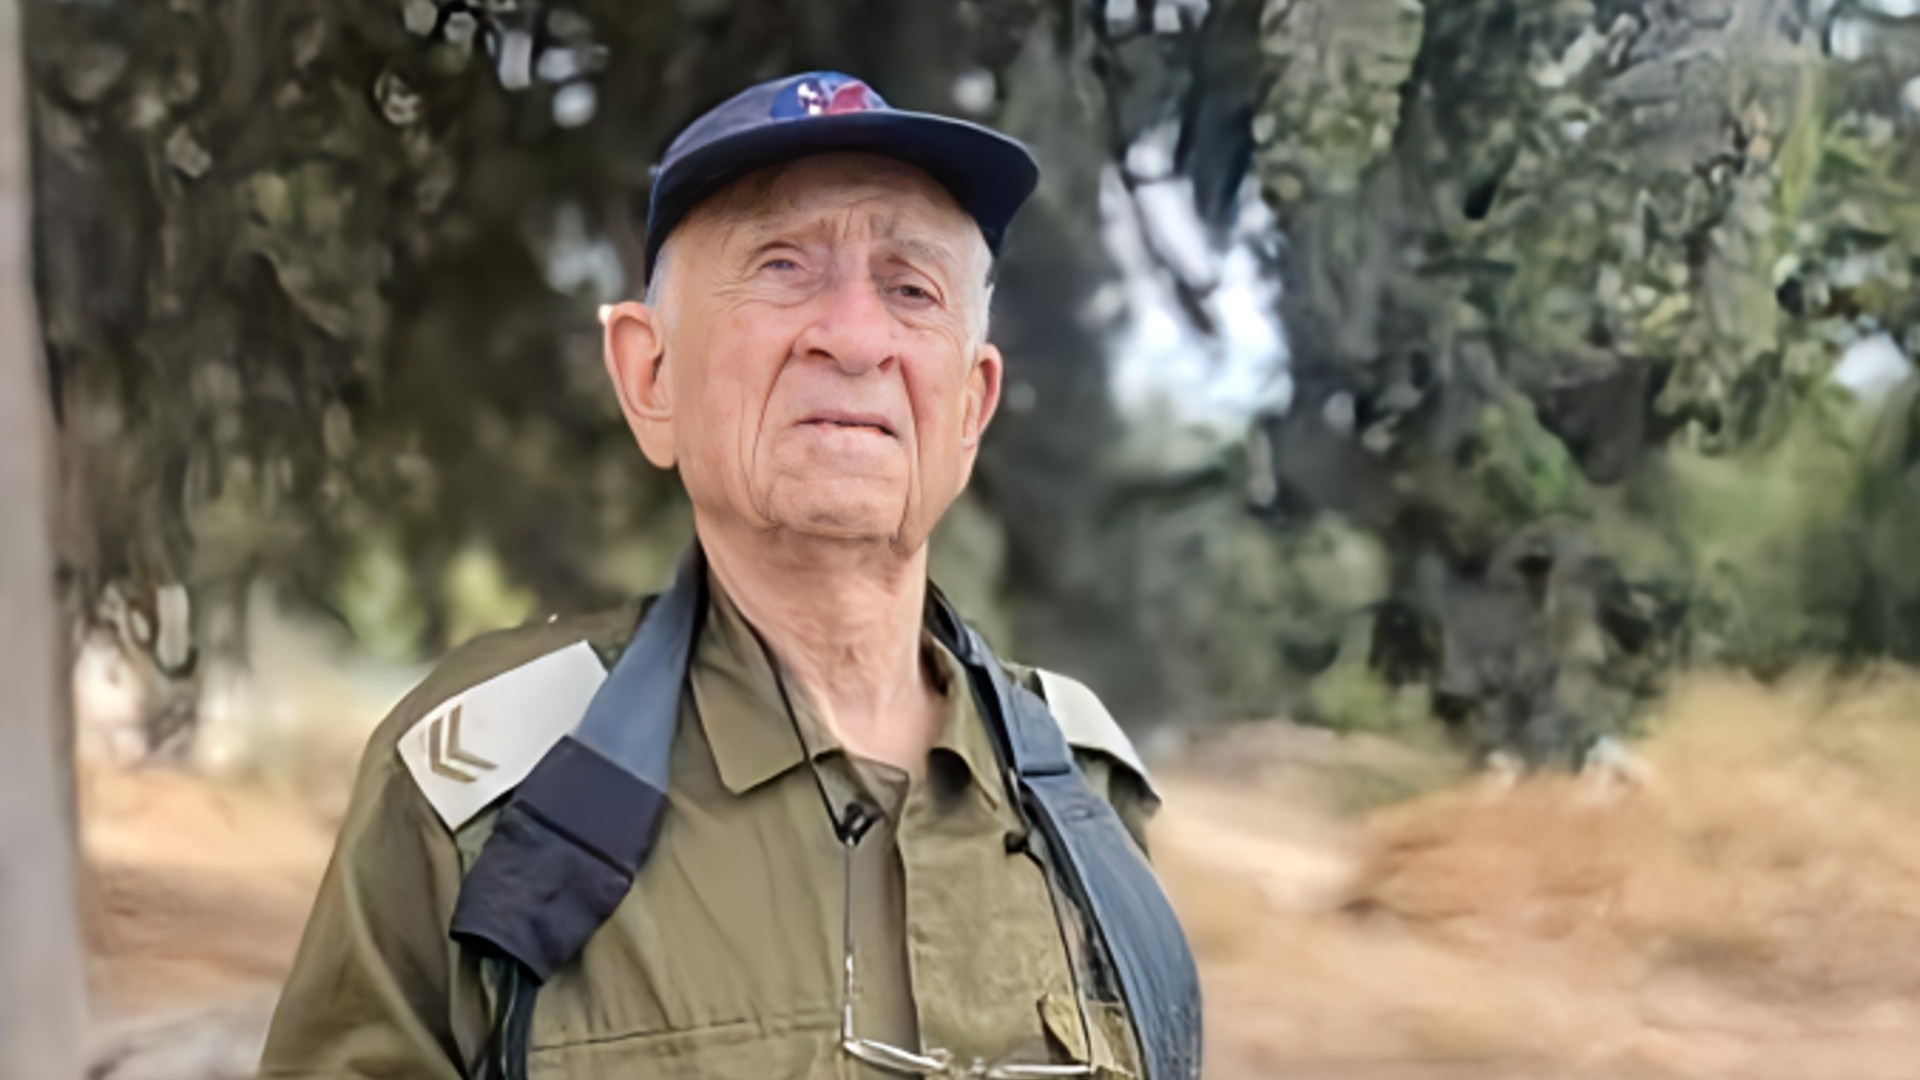 Ezra Yachin, 95, who was involved in the 1948 Deir Yassin massacre, is one of 300,000 reservists called up by Israel's army this week (Social media)